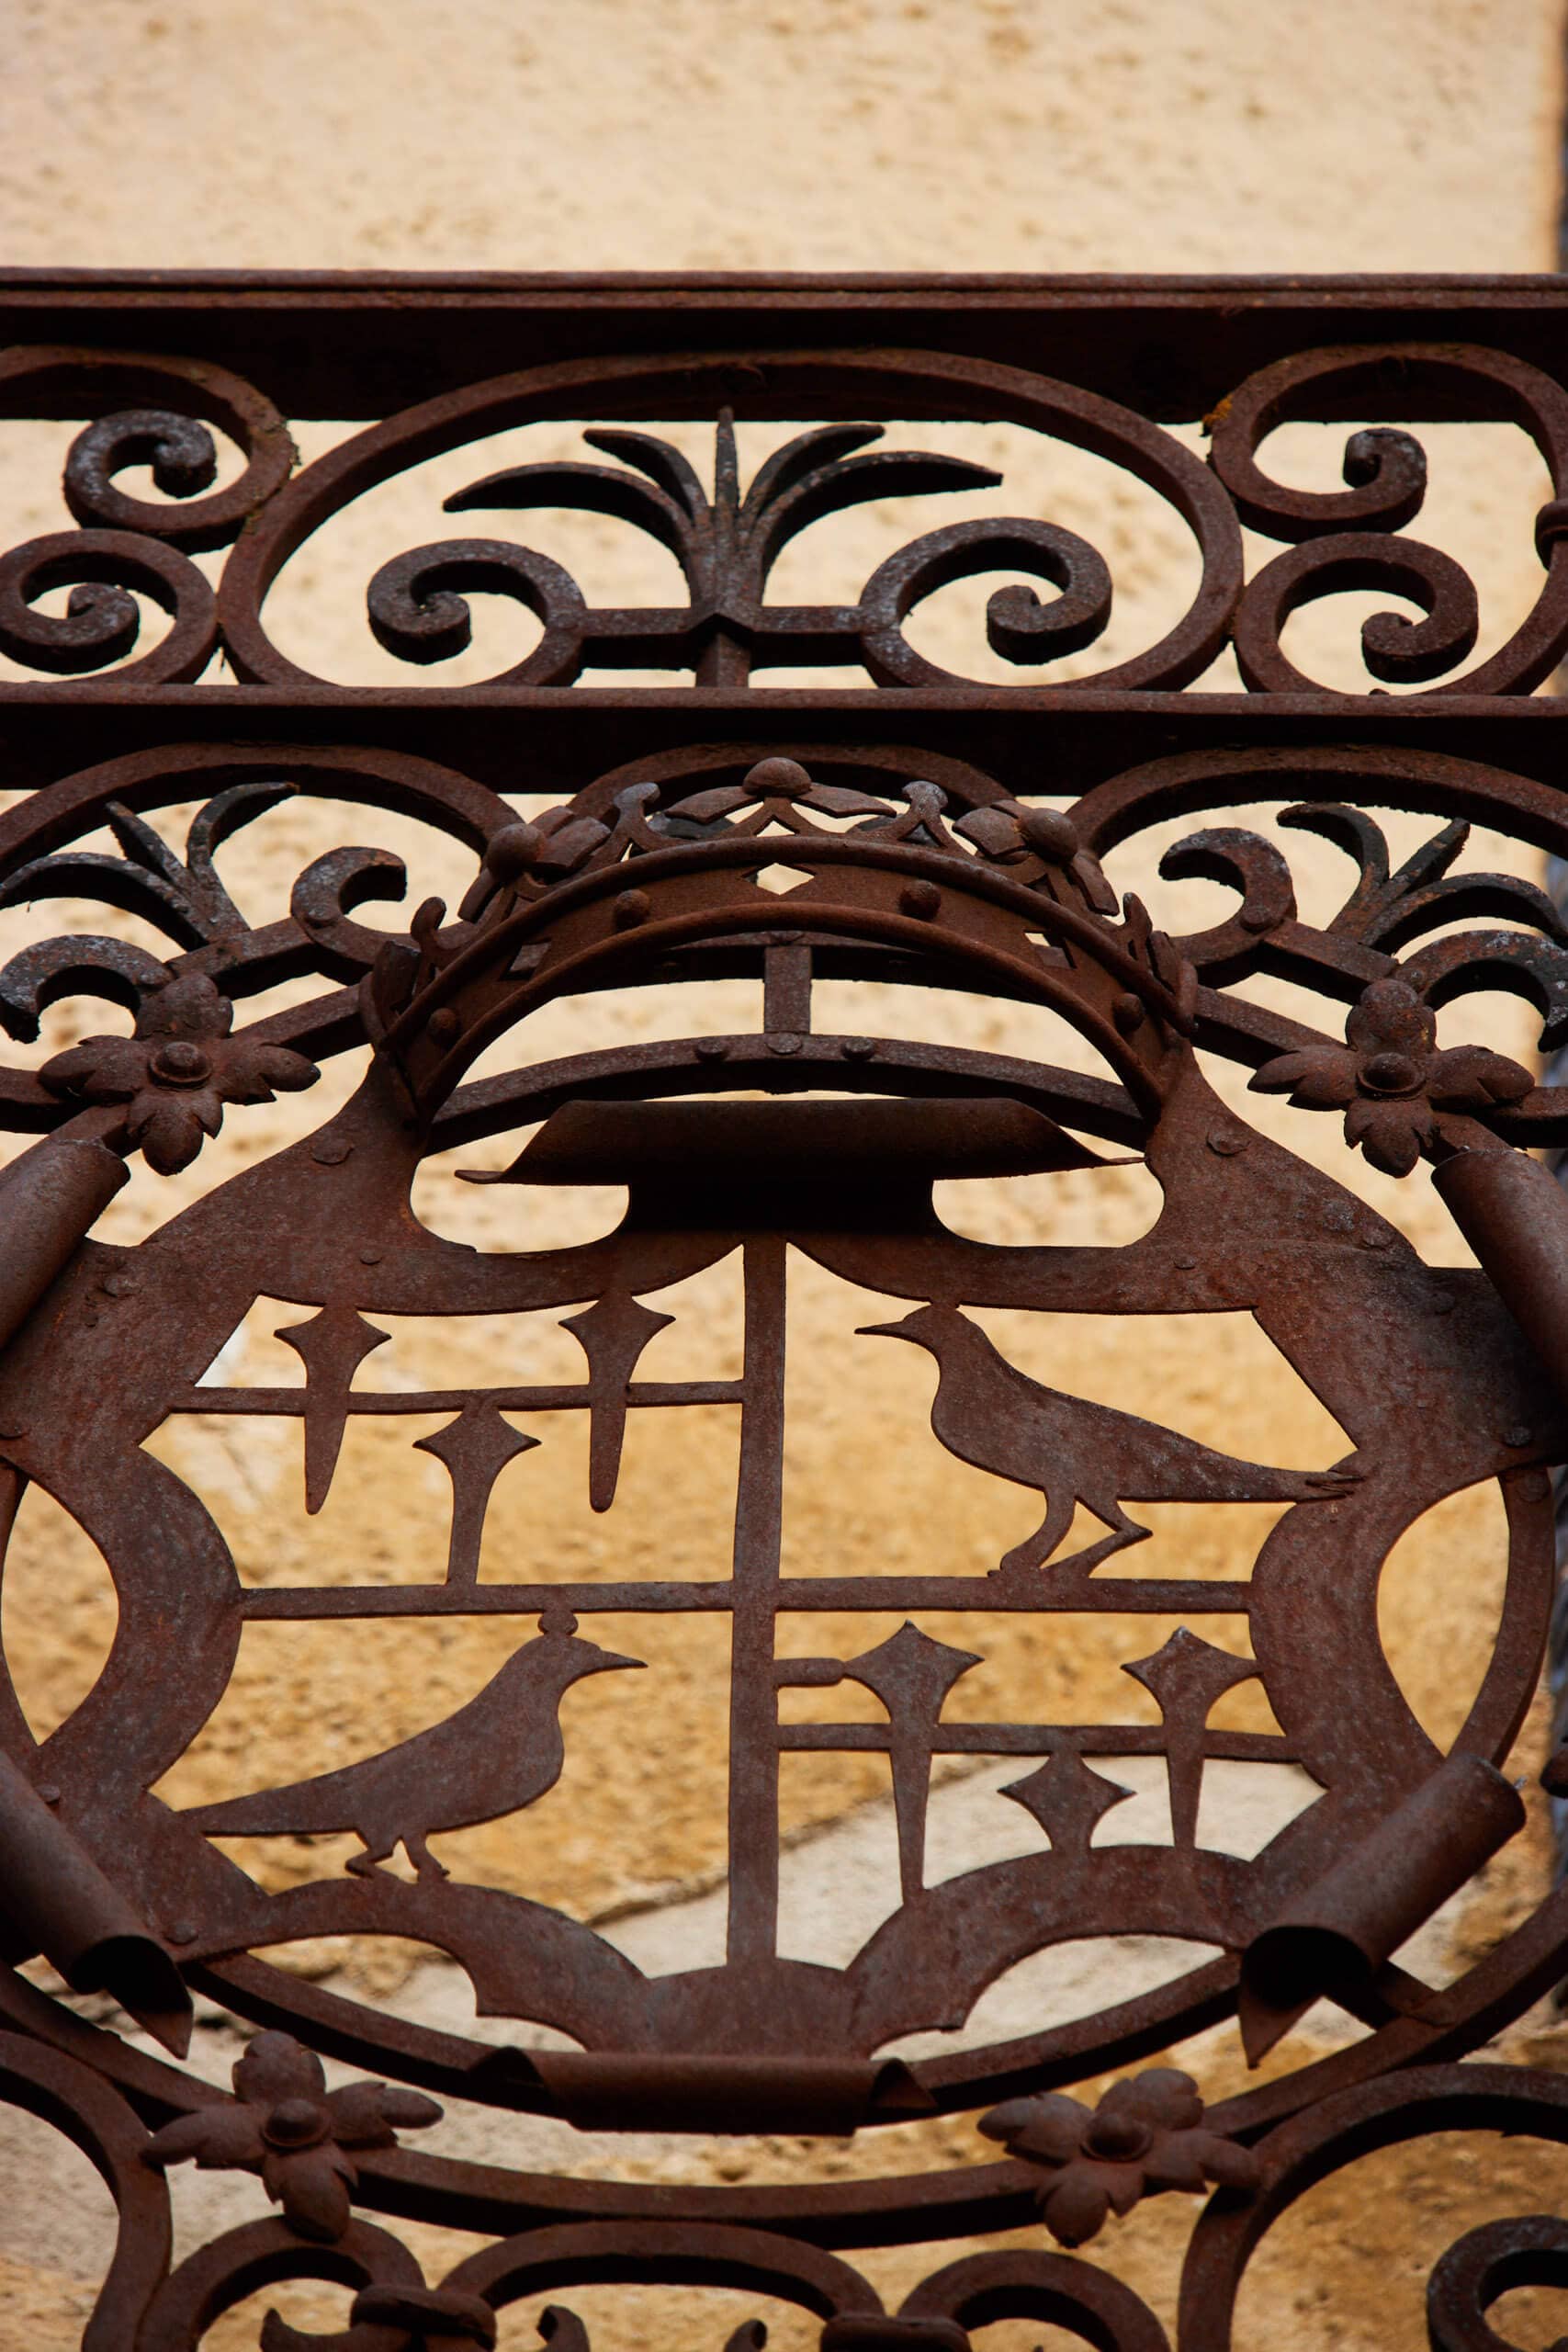 Details on railings of the facade